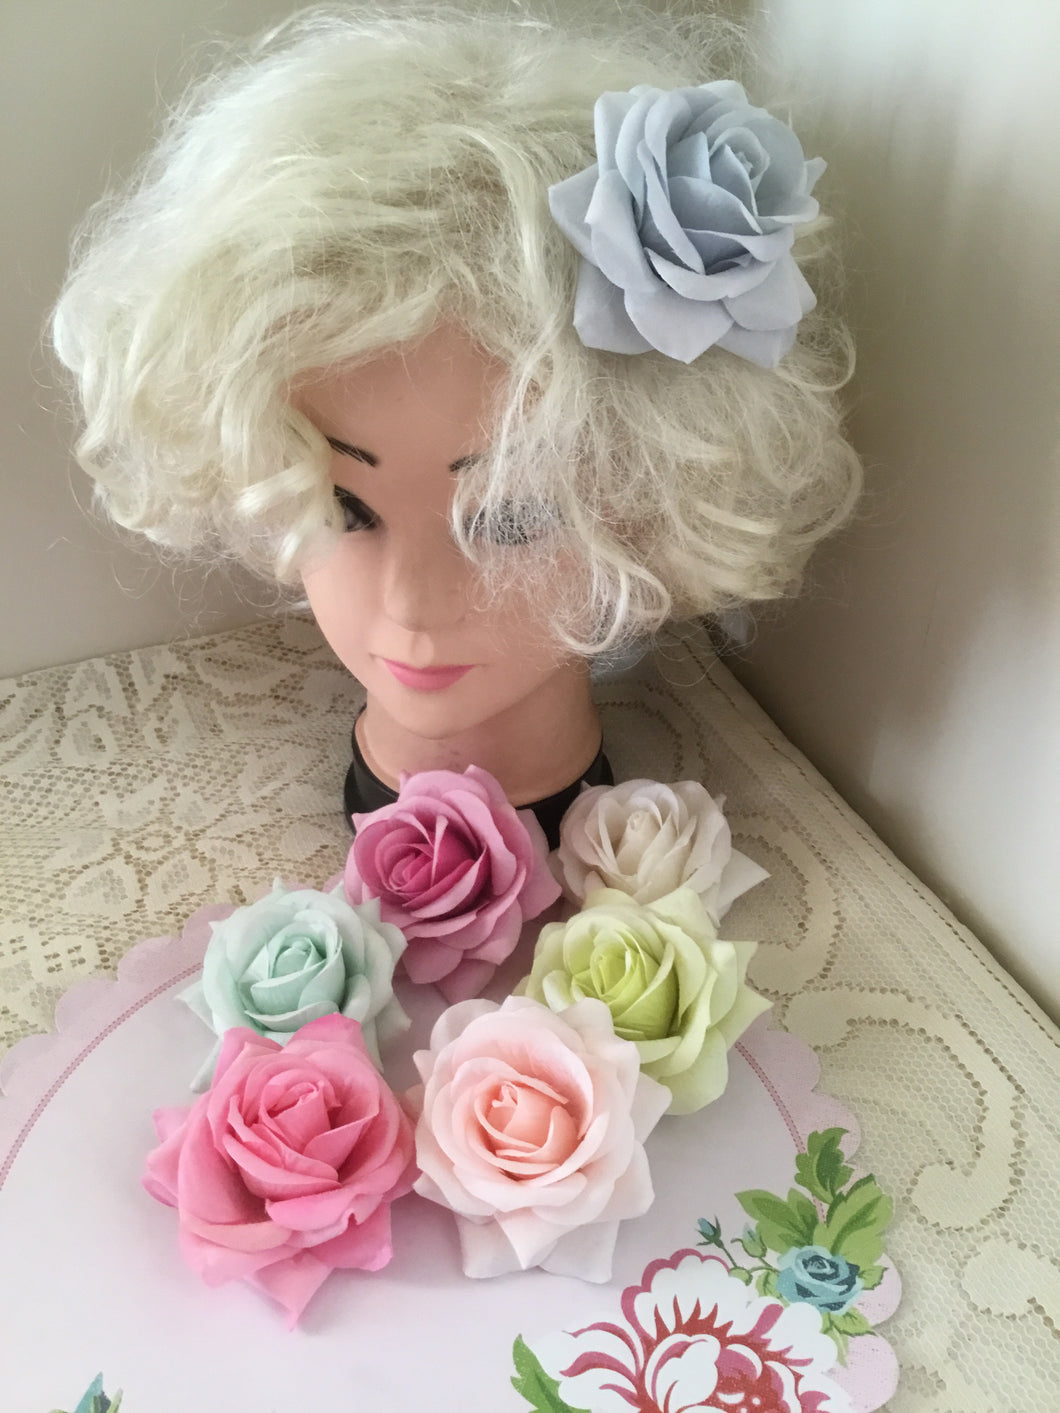 Beautiful flocked vintage style single roses - various colours